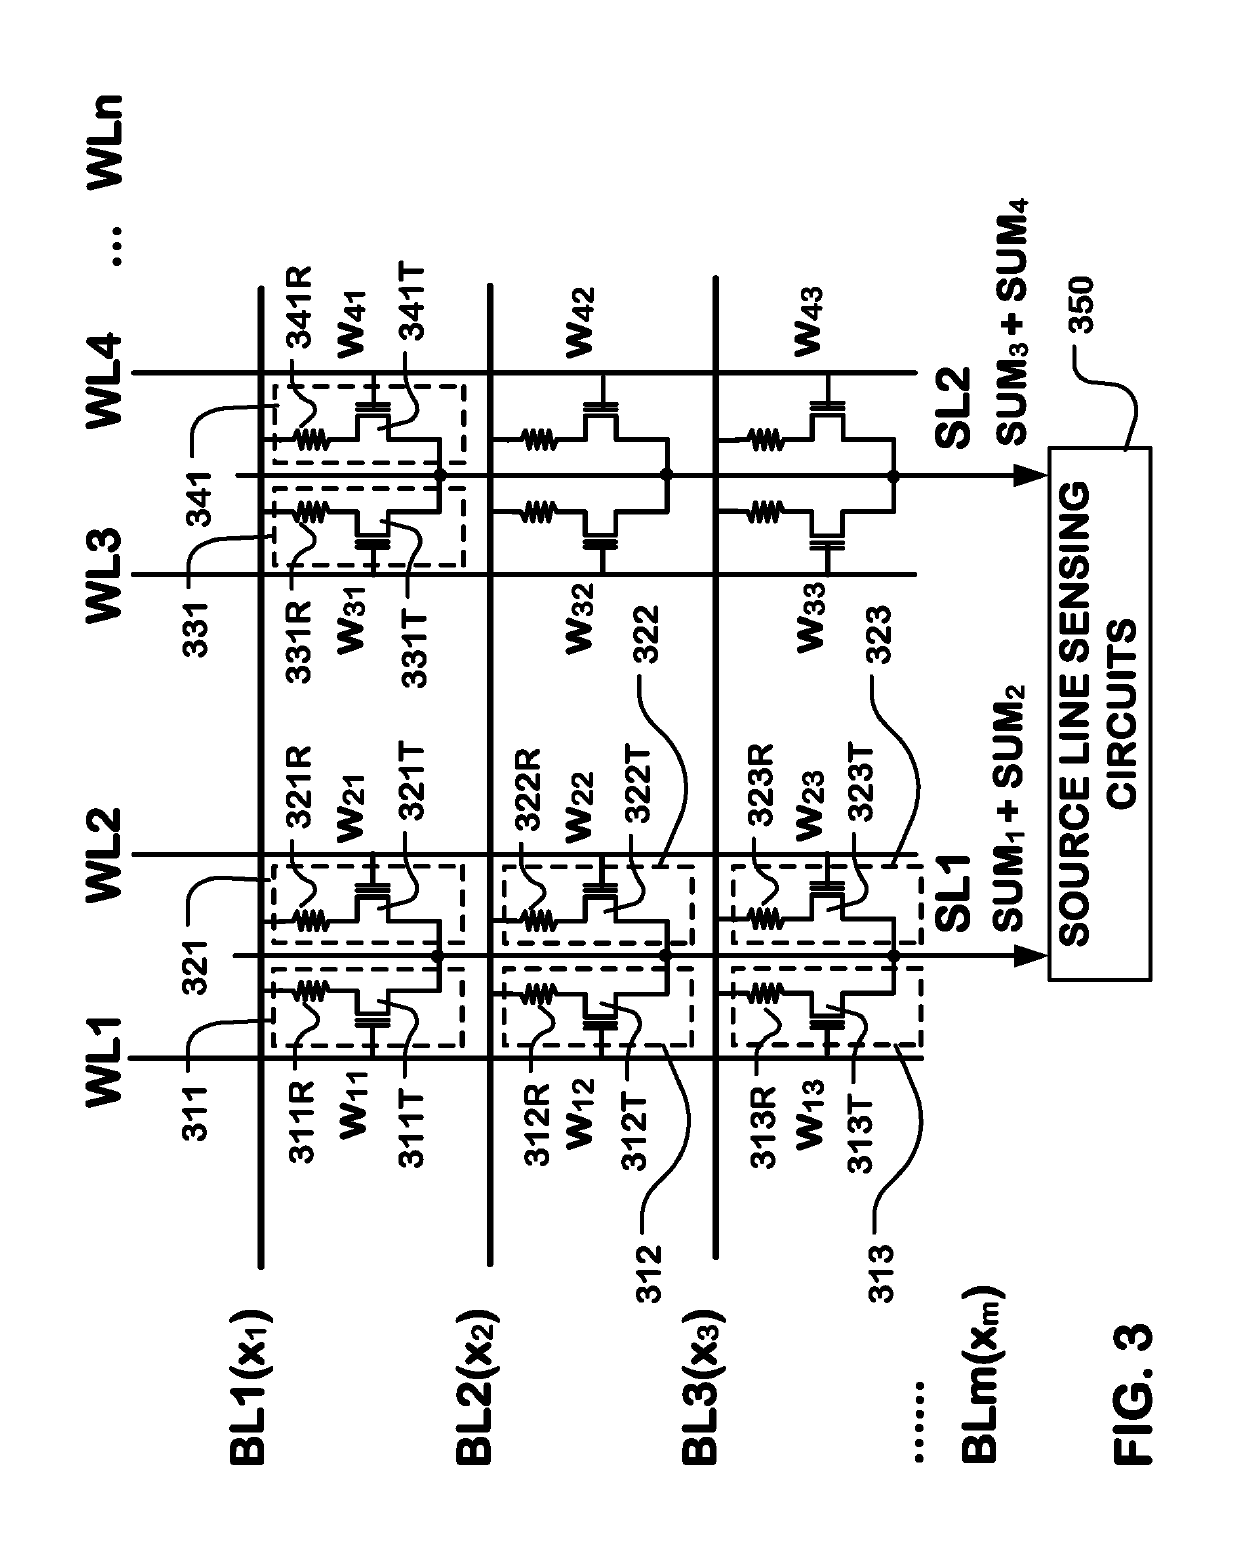 Device structure for neuromorphic computing system